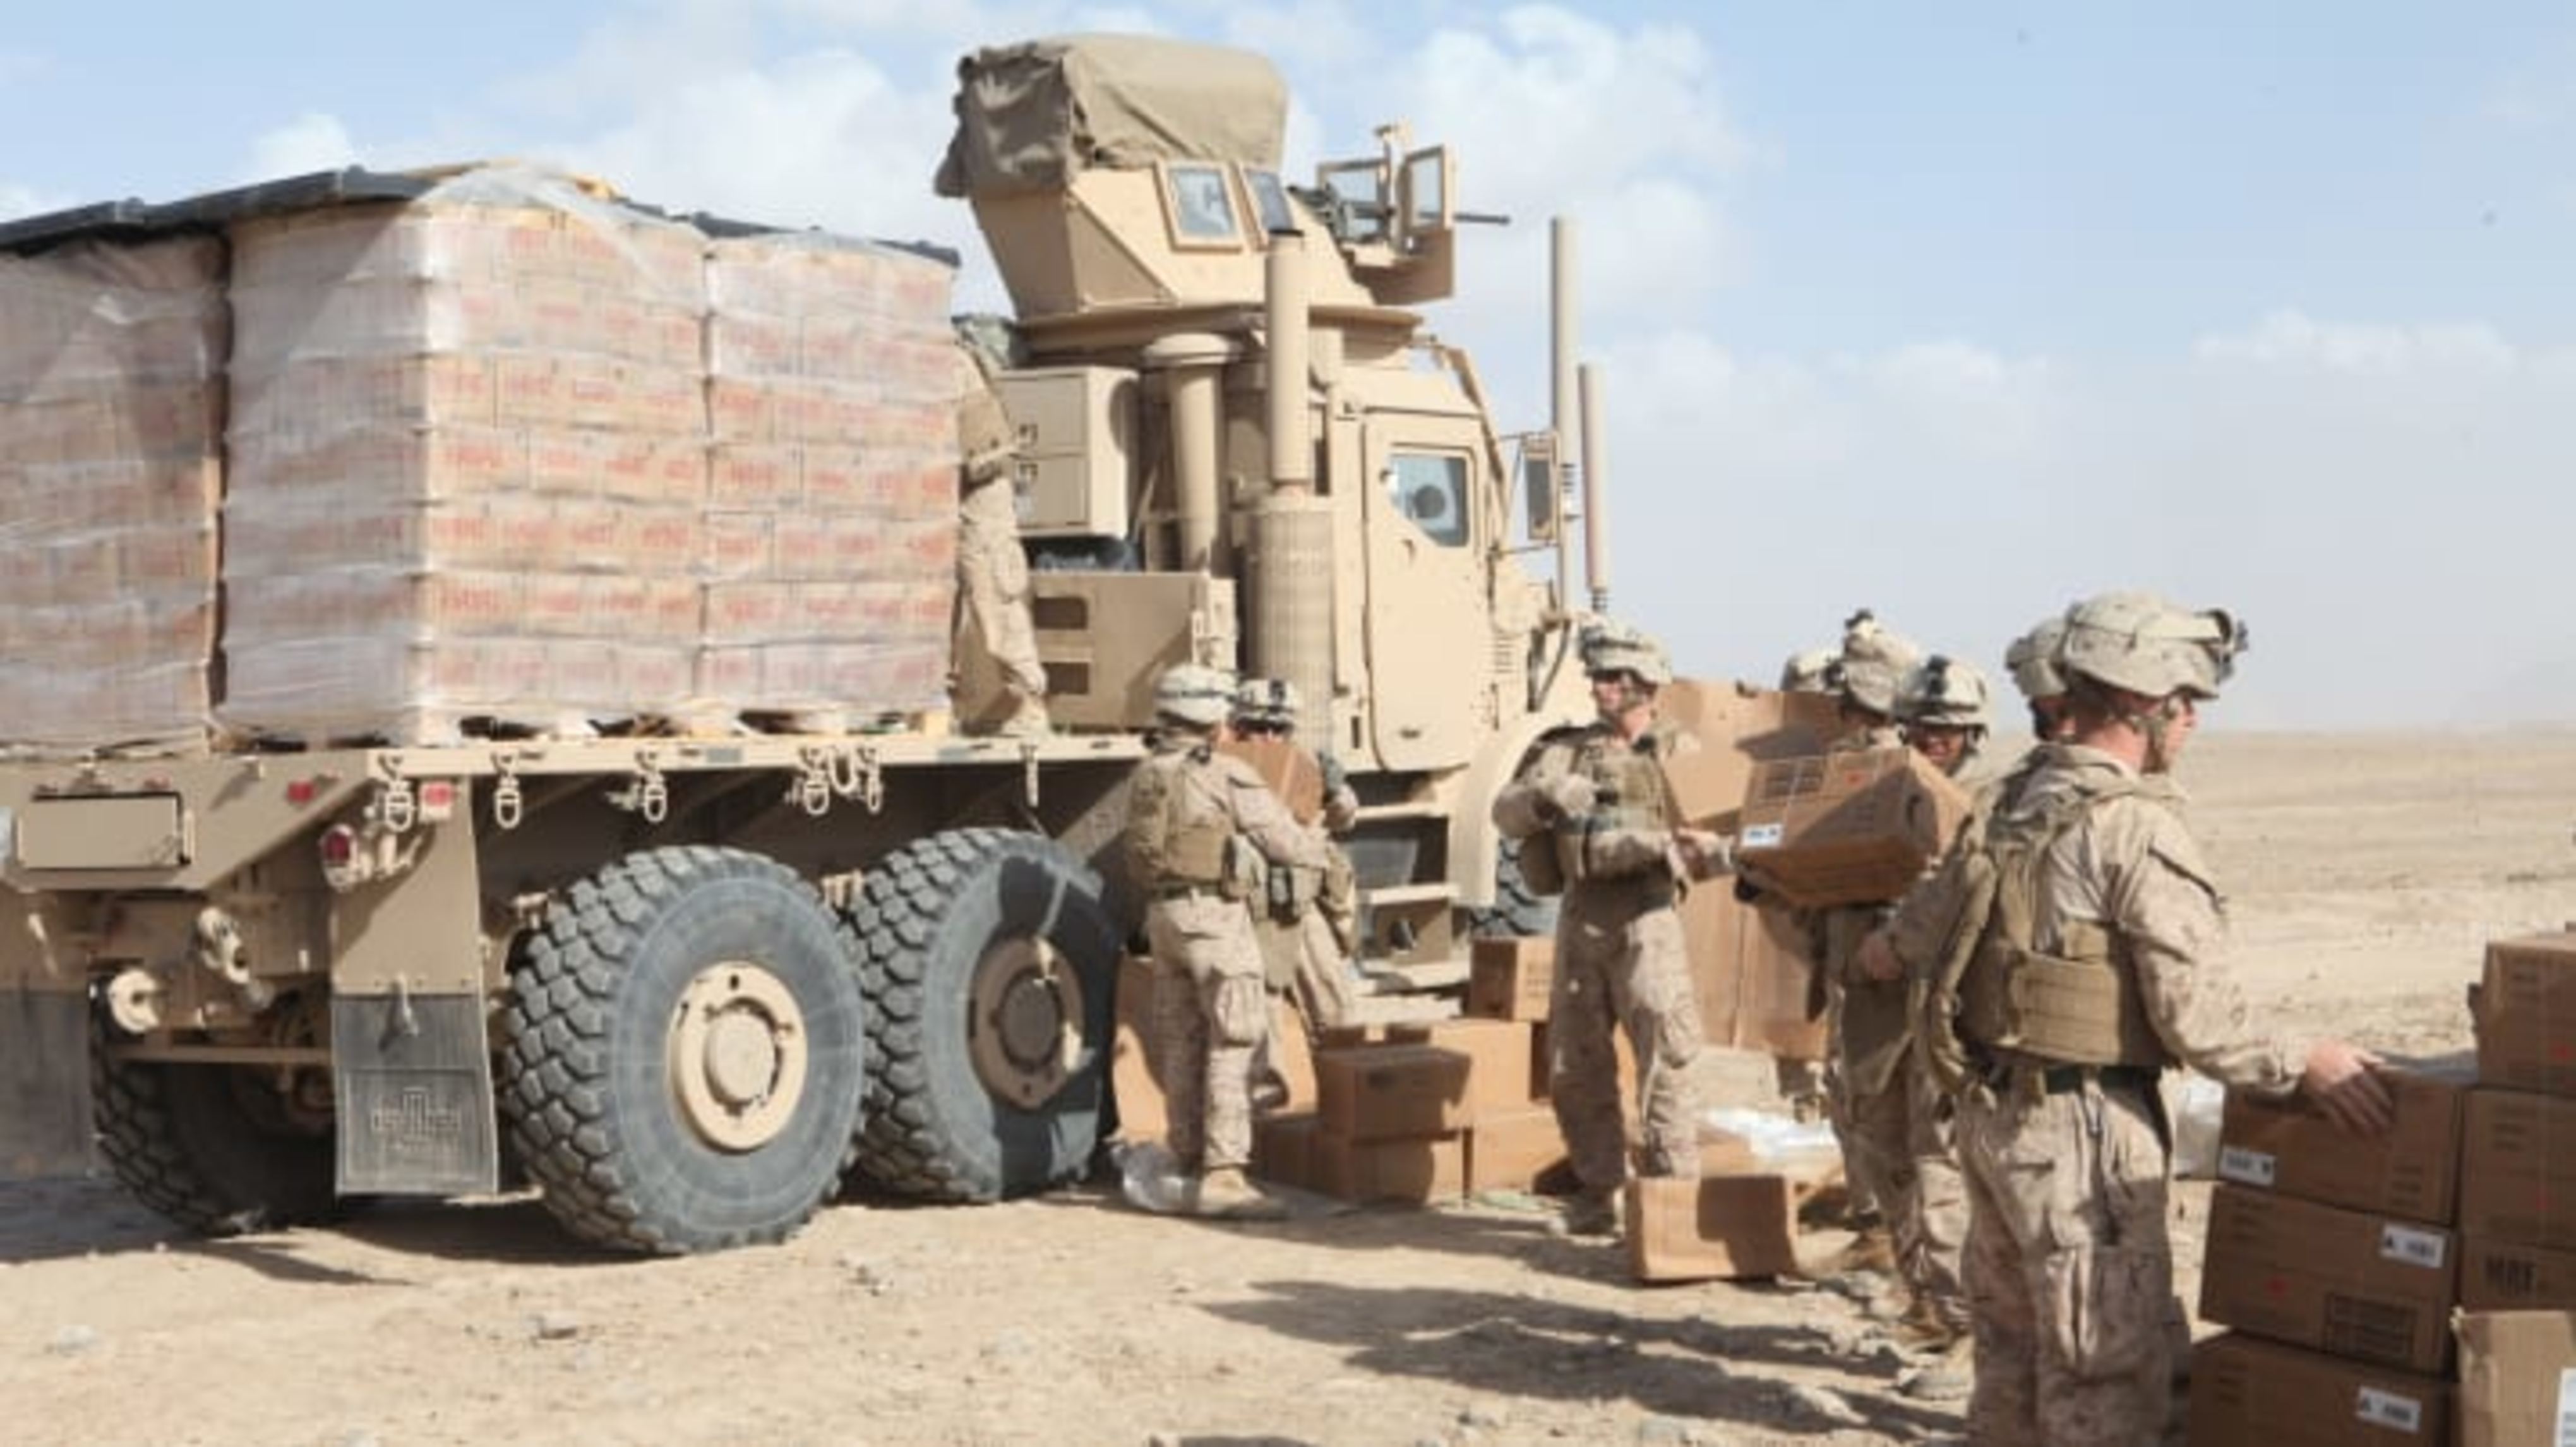 Soldiers unloading MREs and water